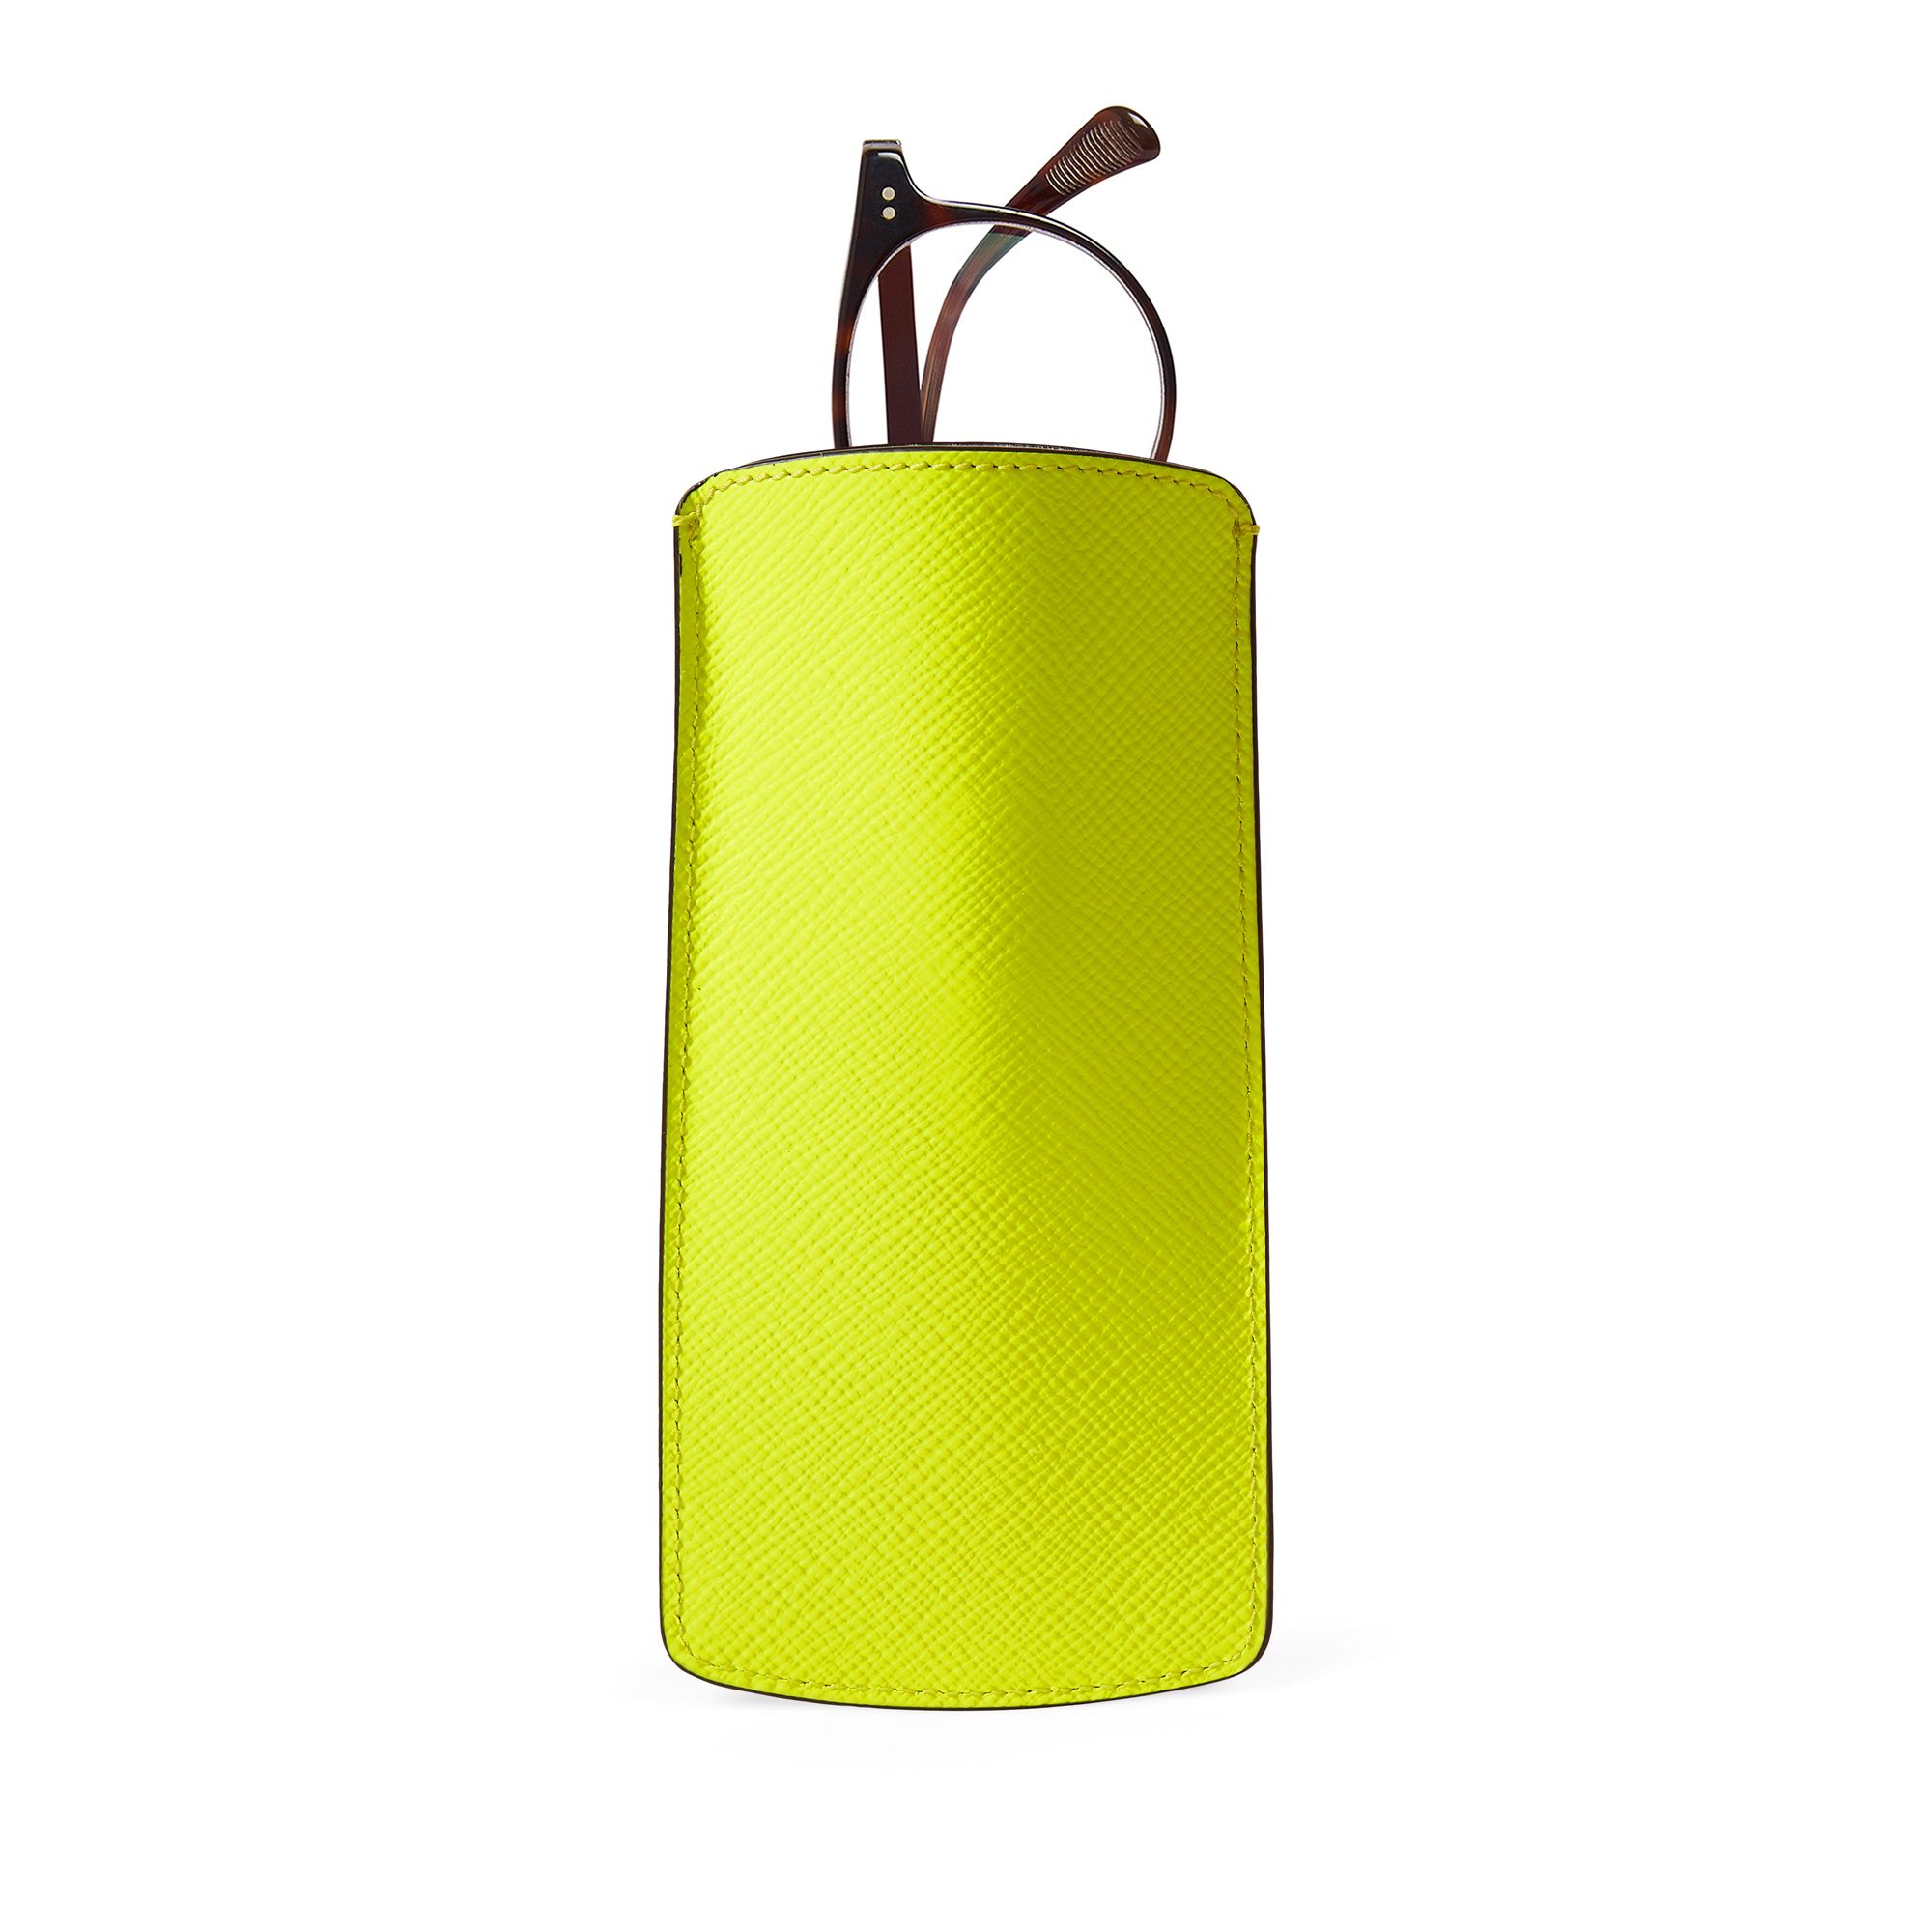 Glasses Case in Panama in neon yellow | Smythson | Smythson